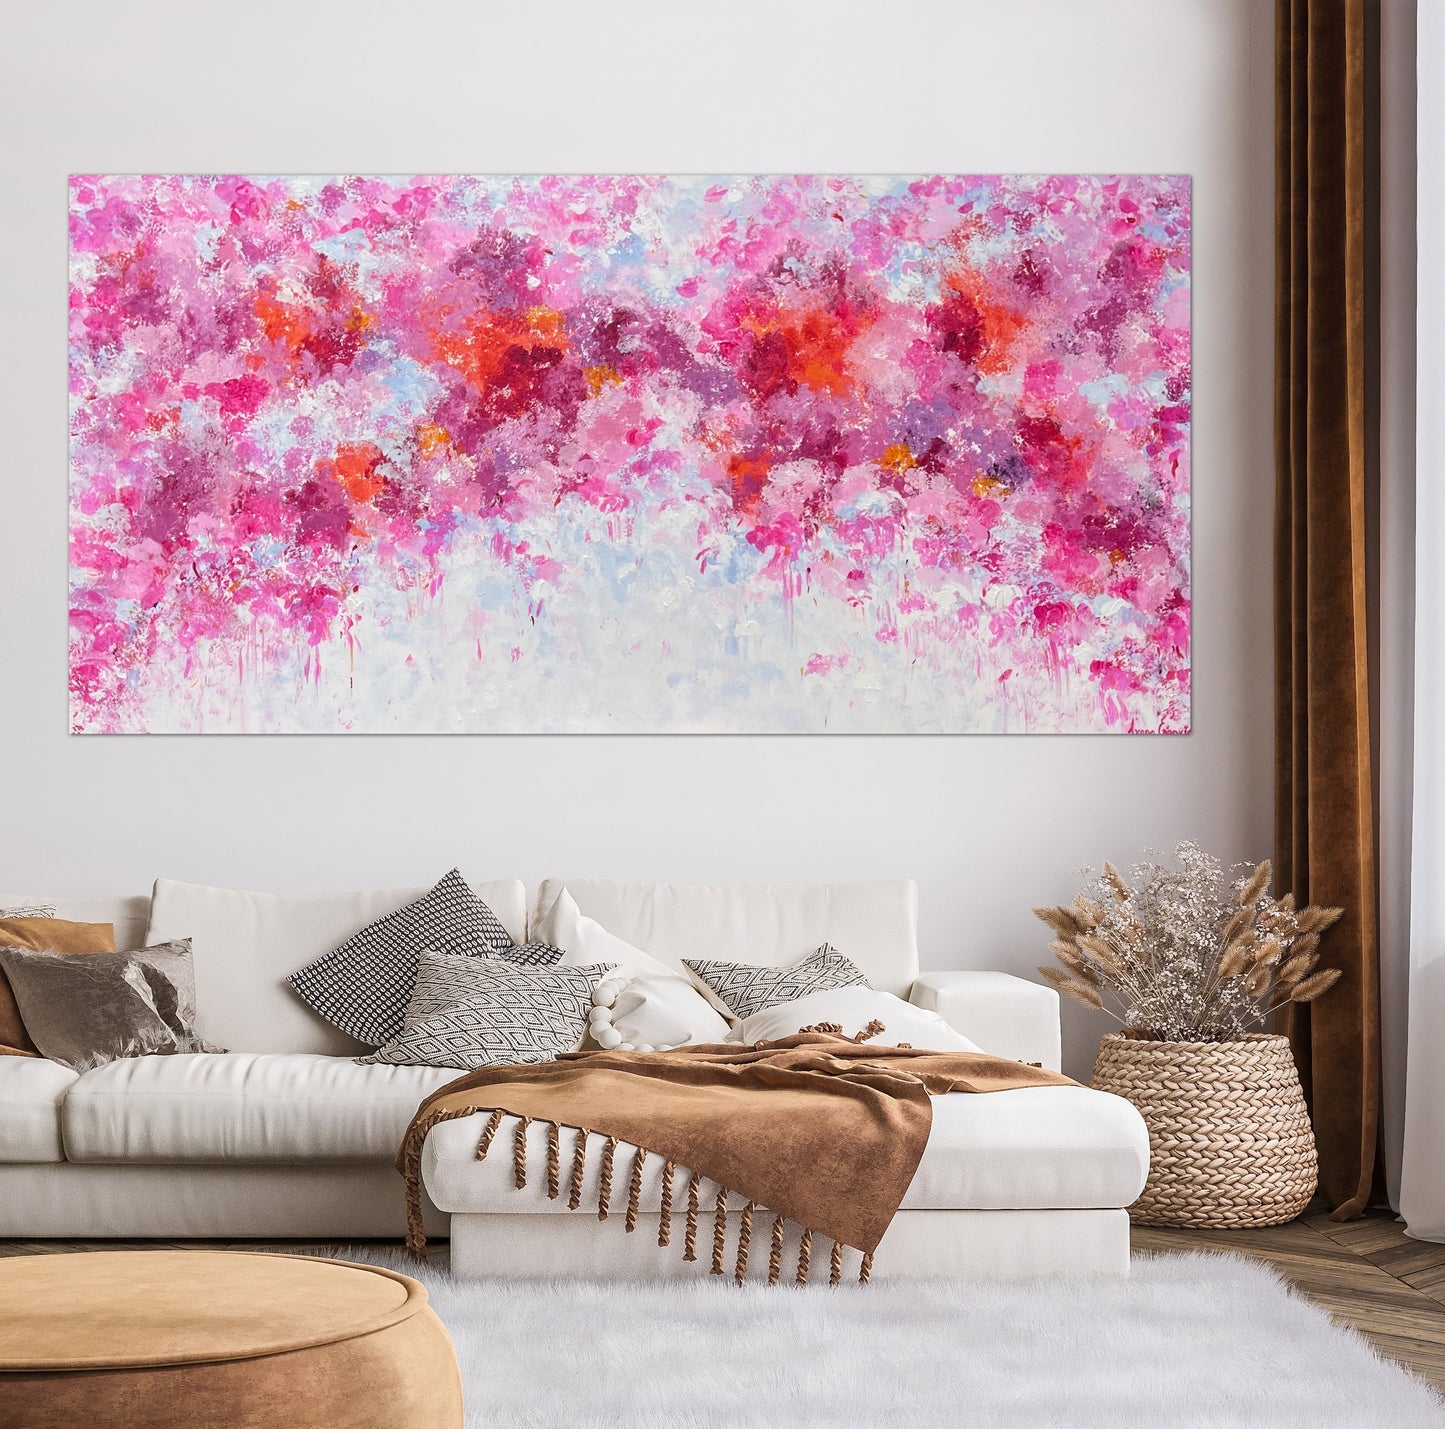 It's Love No 18 - Large Floral Original Abstract